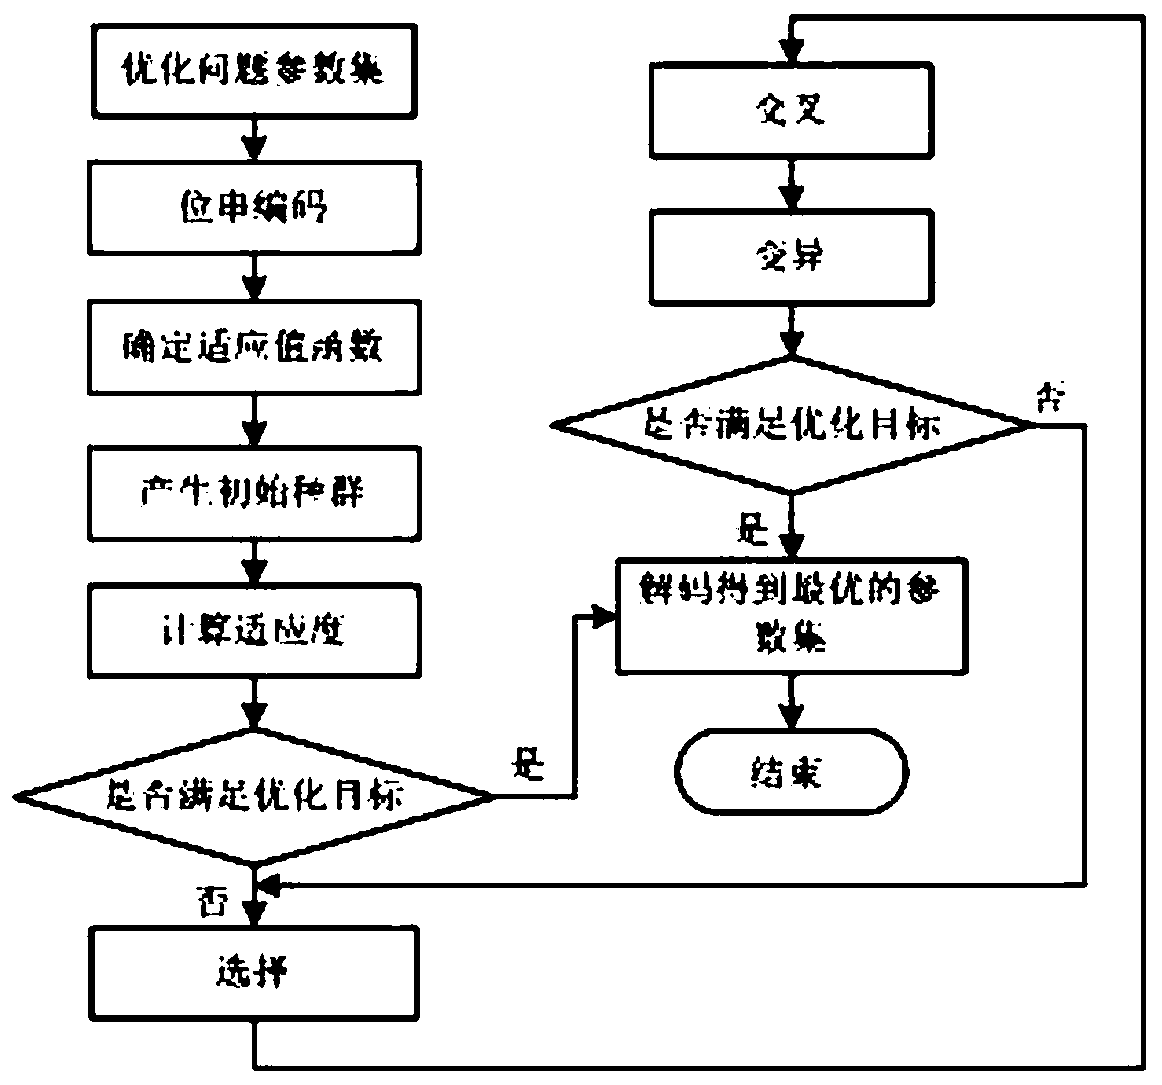 Structural vibration-oriented active control optimal configuration method